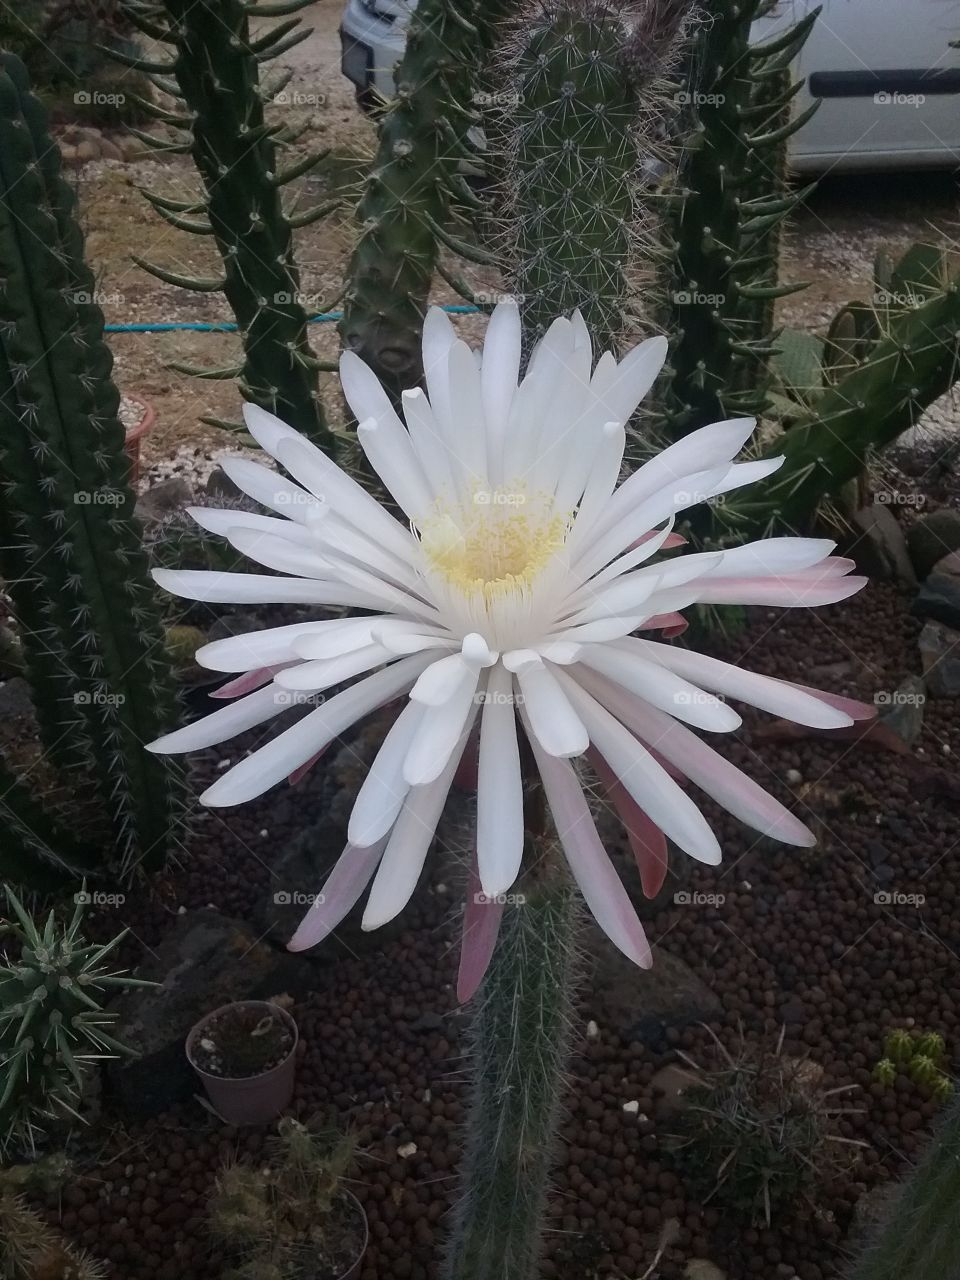 another view of this cactus flower